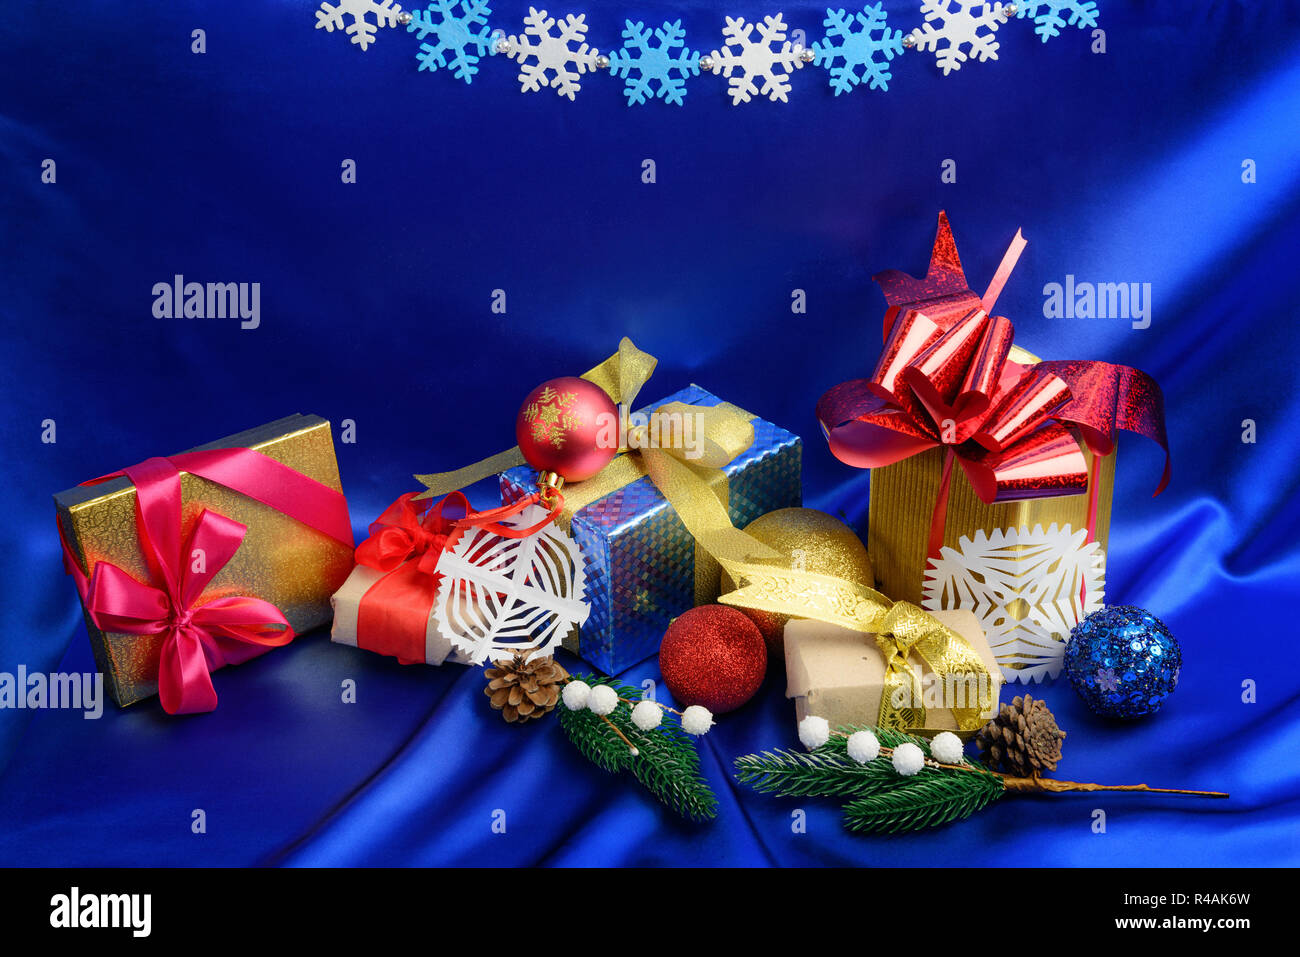 Homemade Christmas gift boxes and decorations over blue silk background Stock Photo